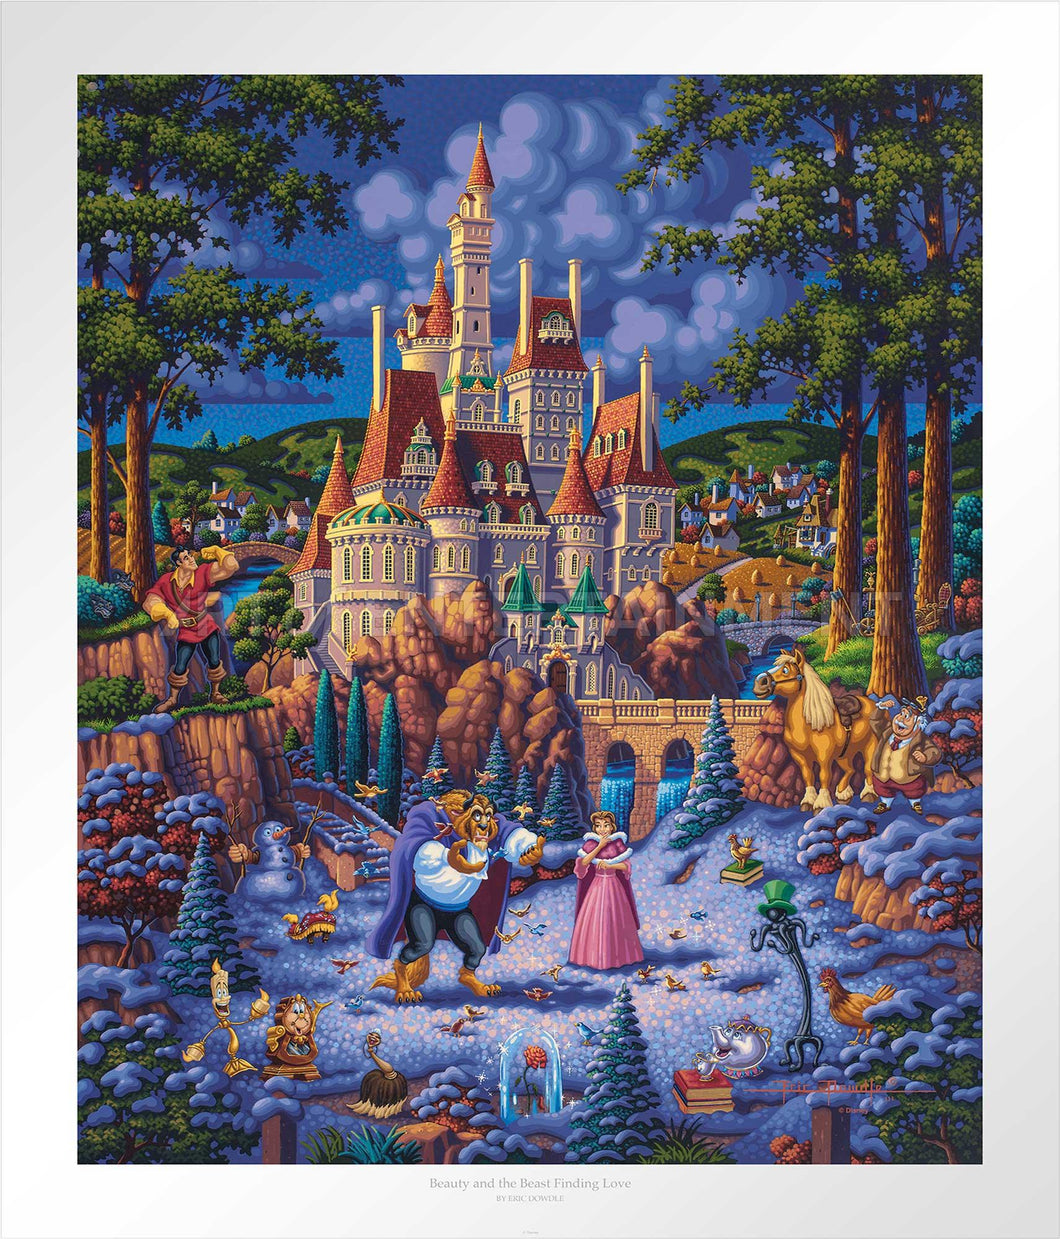 Beauty and the Beast Finding Love - Limited Edition Paper - AP - (Unframed)